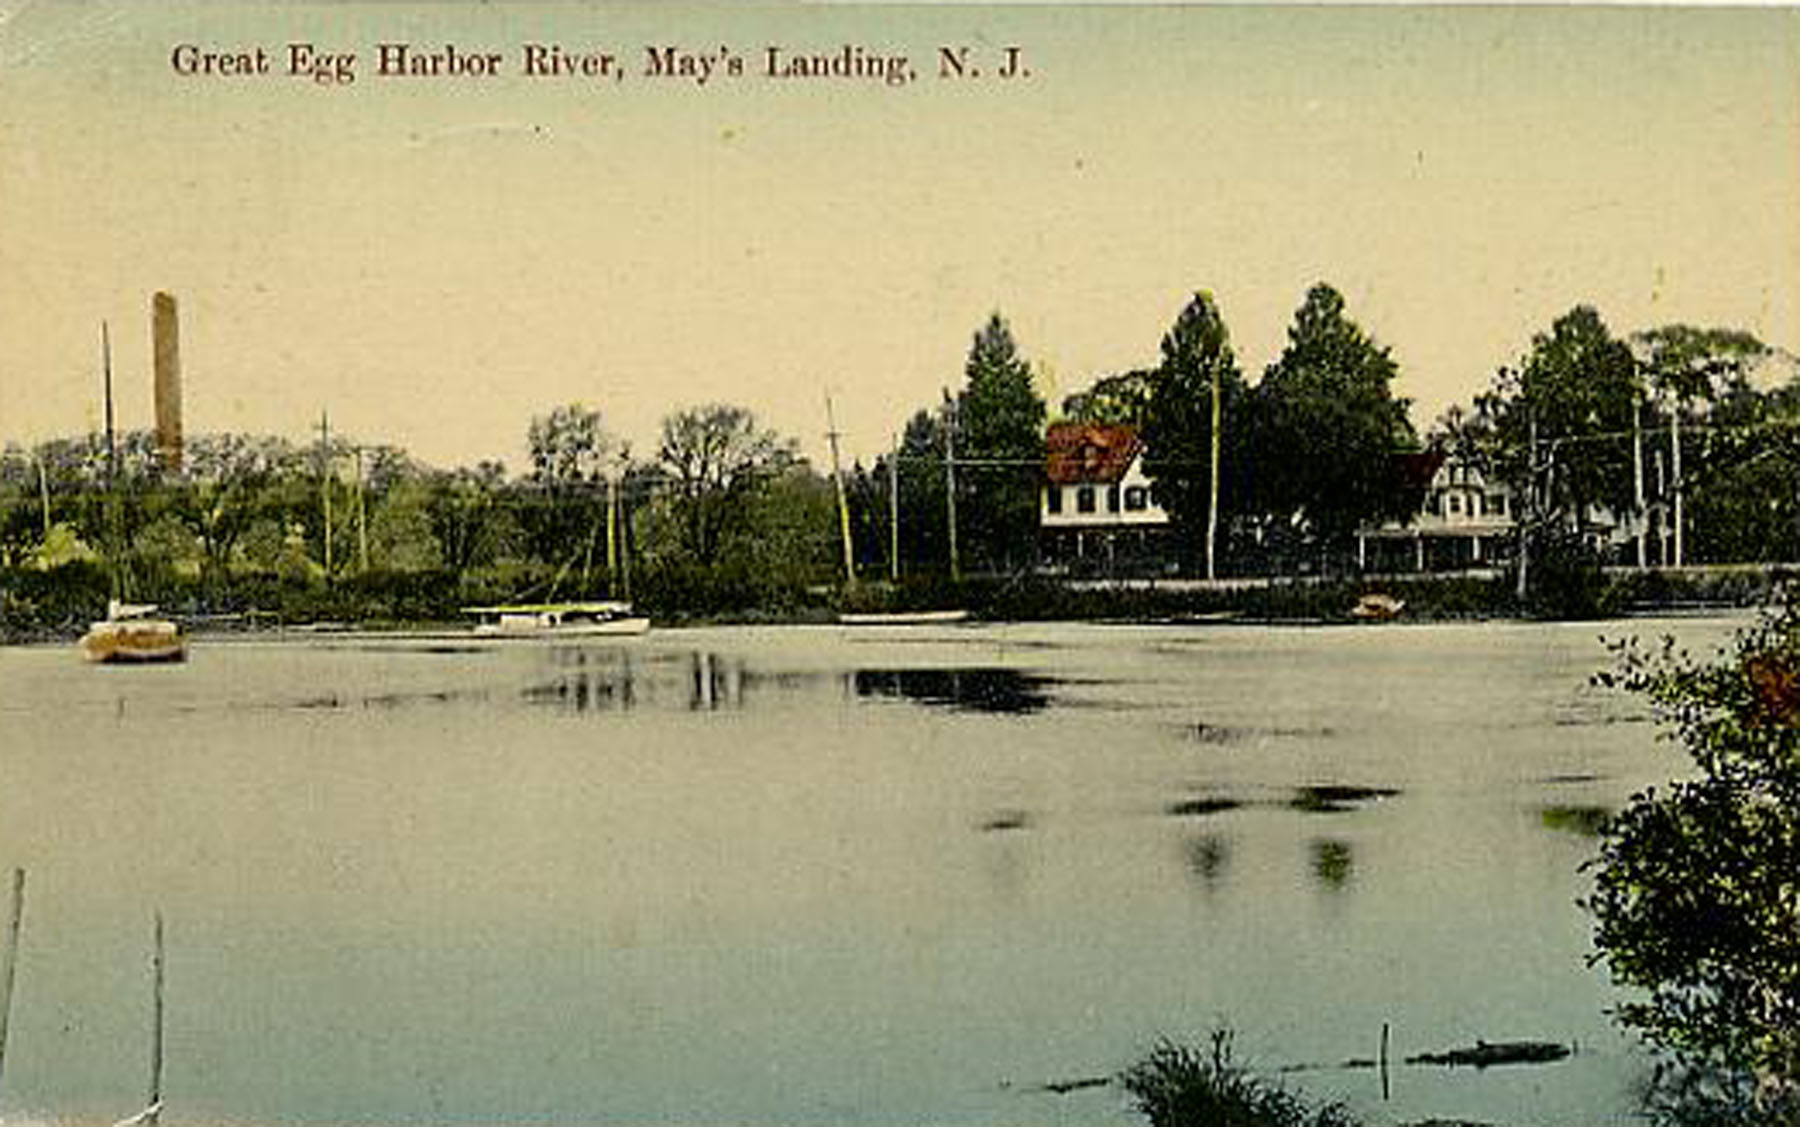 Mays Landing - View of the Great Egg Harbor River - c 1910